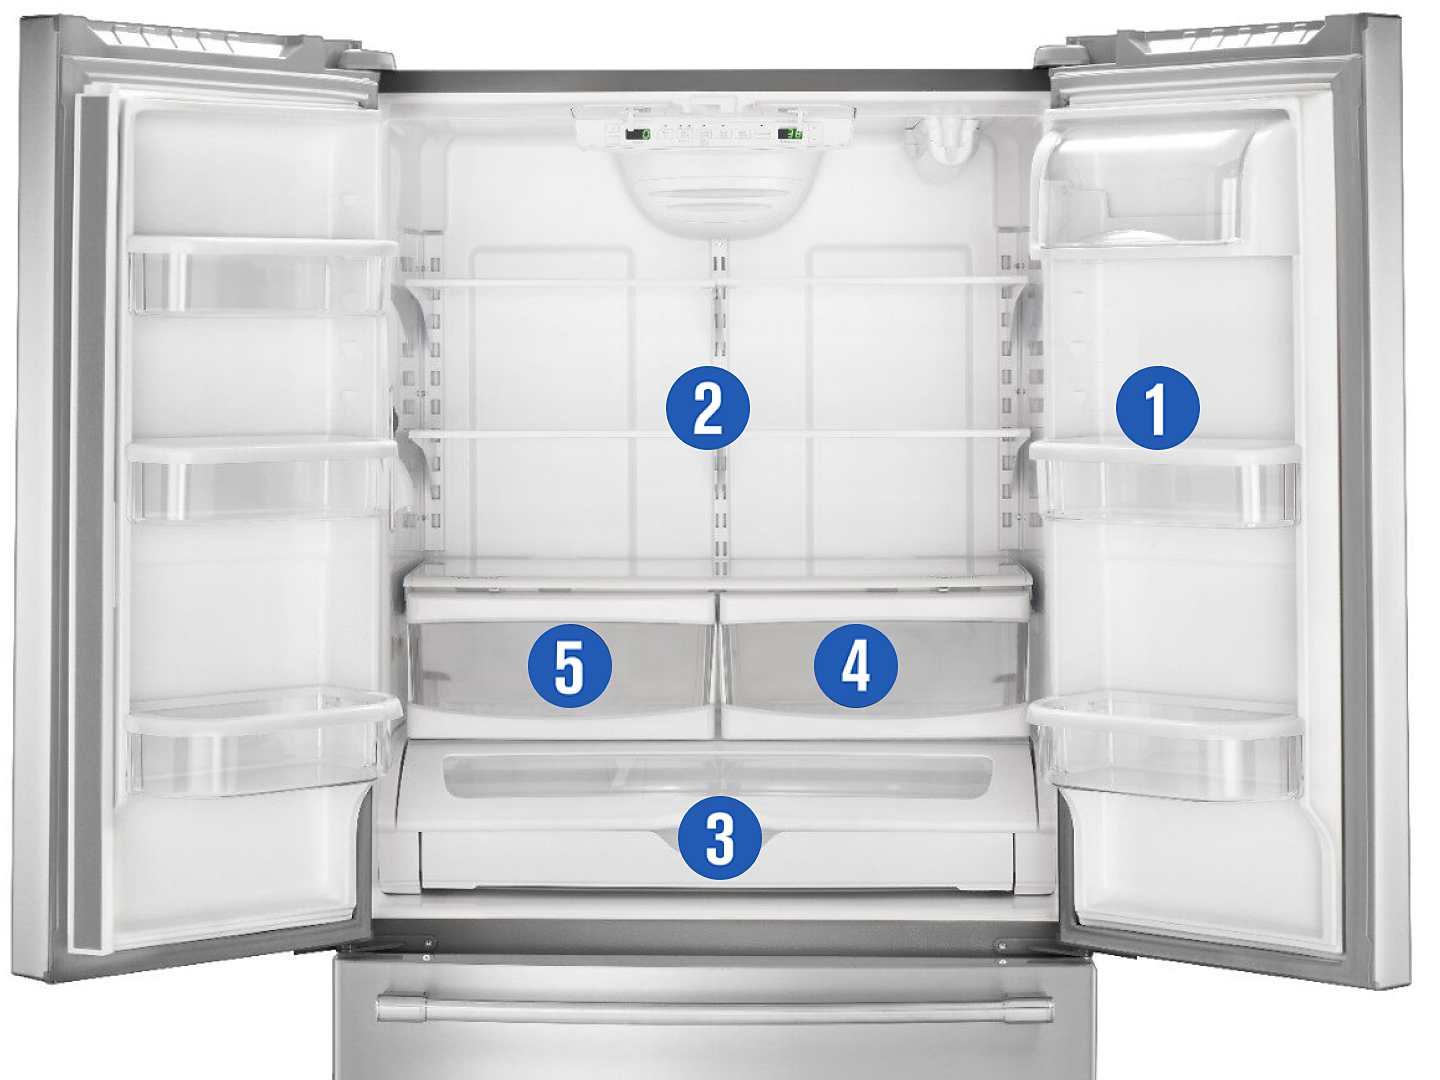 Maytag® refrigerator compartments